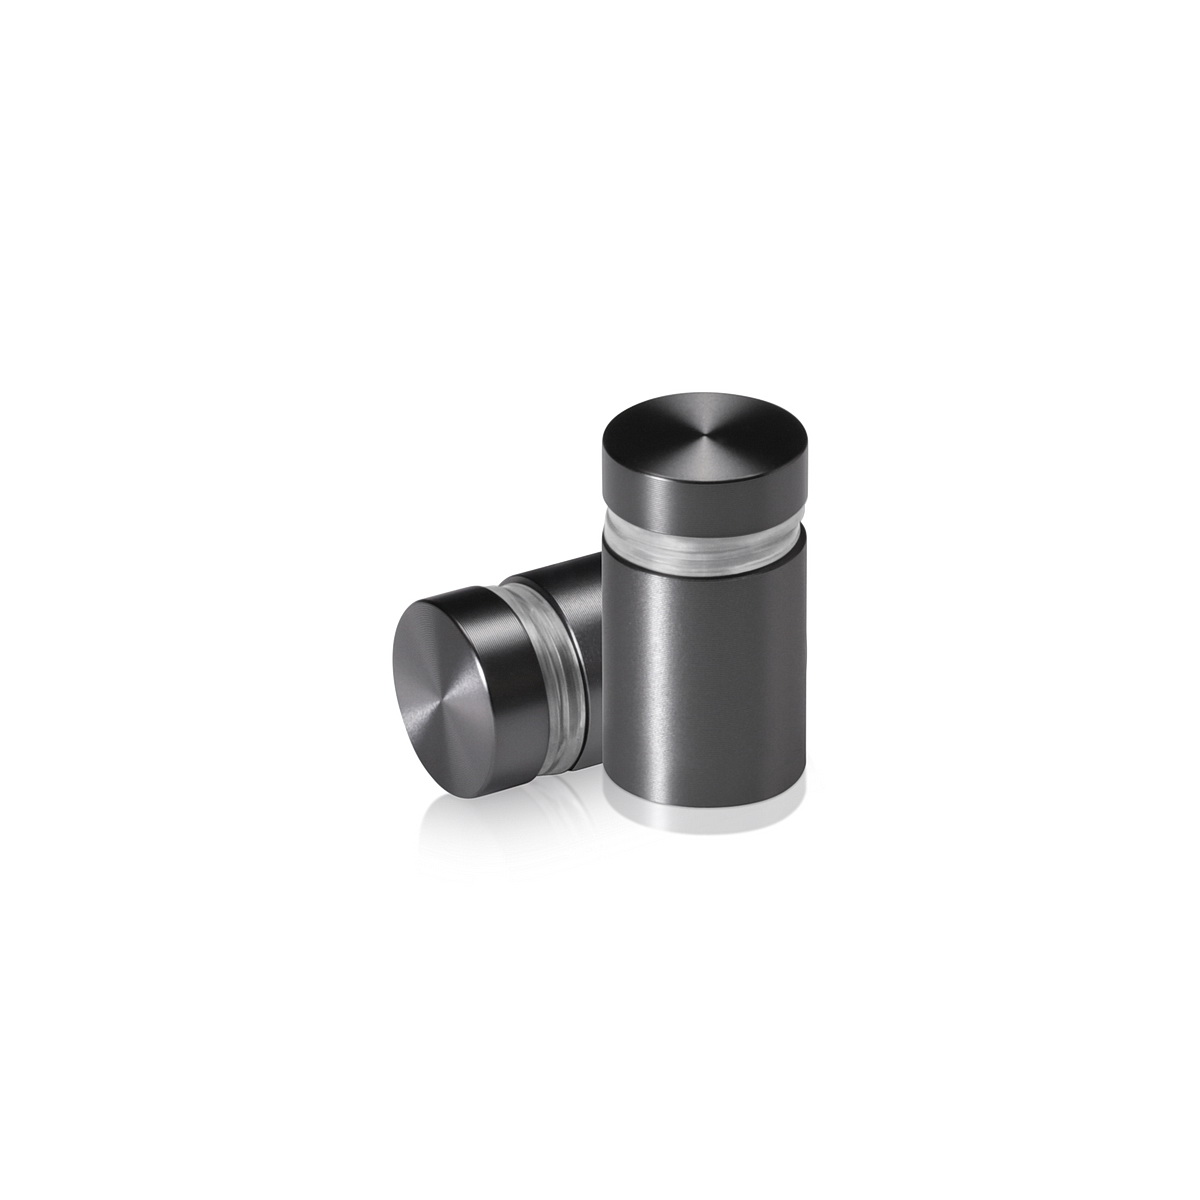 5/8'' Diameter X 3/4'' Barrel Length, Aluminum Flat Head Standoffs, Titanium Anodized Finish Easy Fasten Standoff (For Inside / Outside use) Tamper Proof Standoff [Required Material Hole Size: 7/16'']